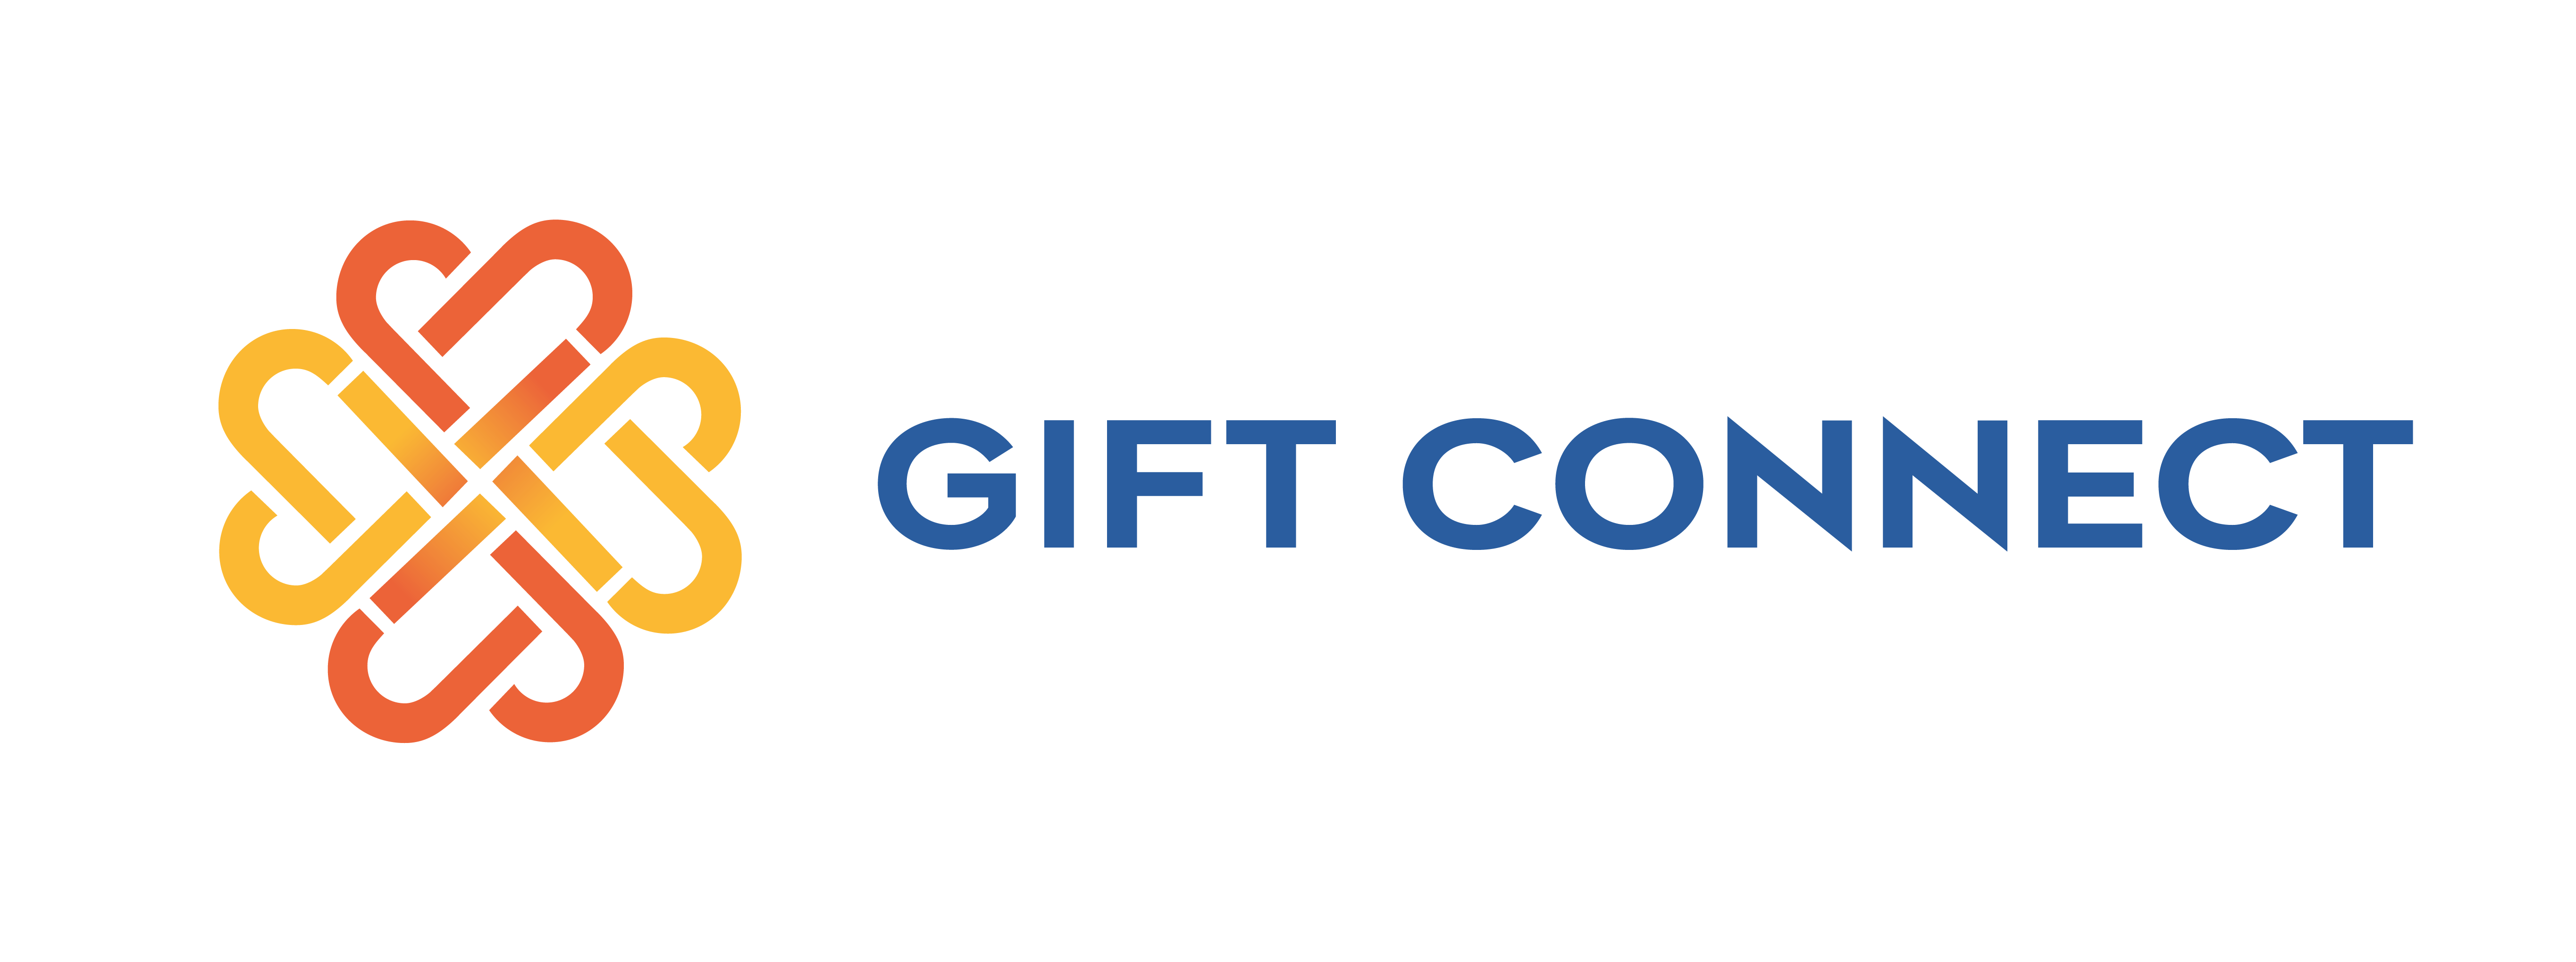 Gift Connect